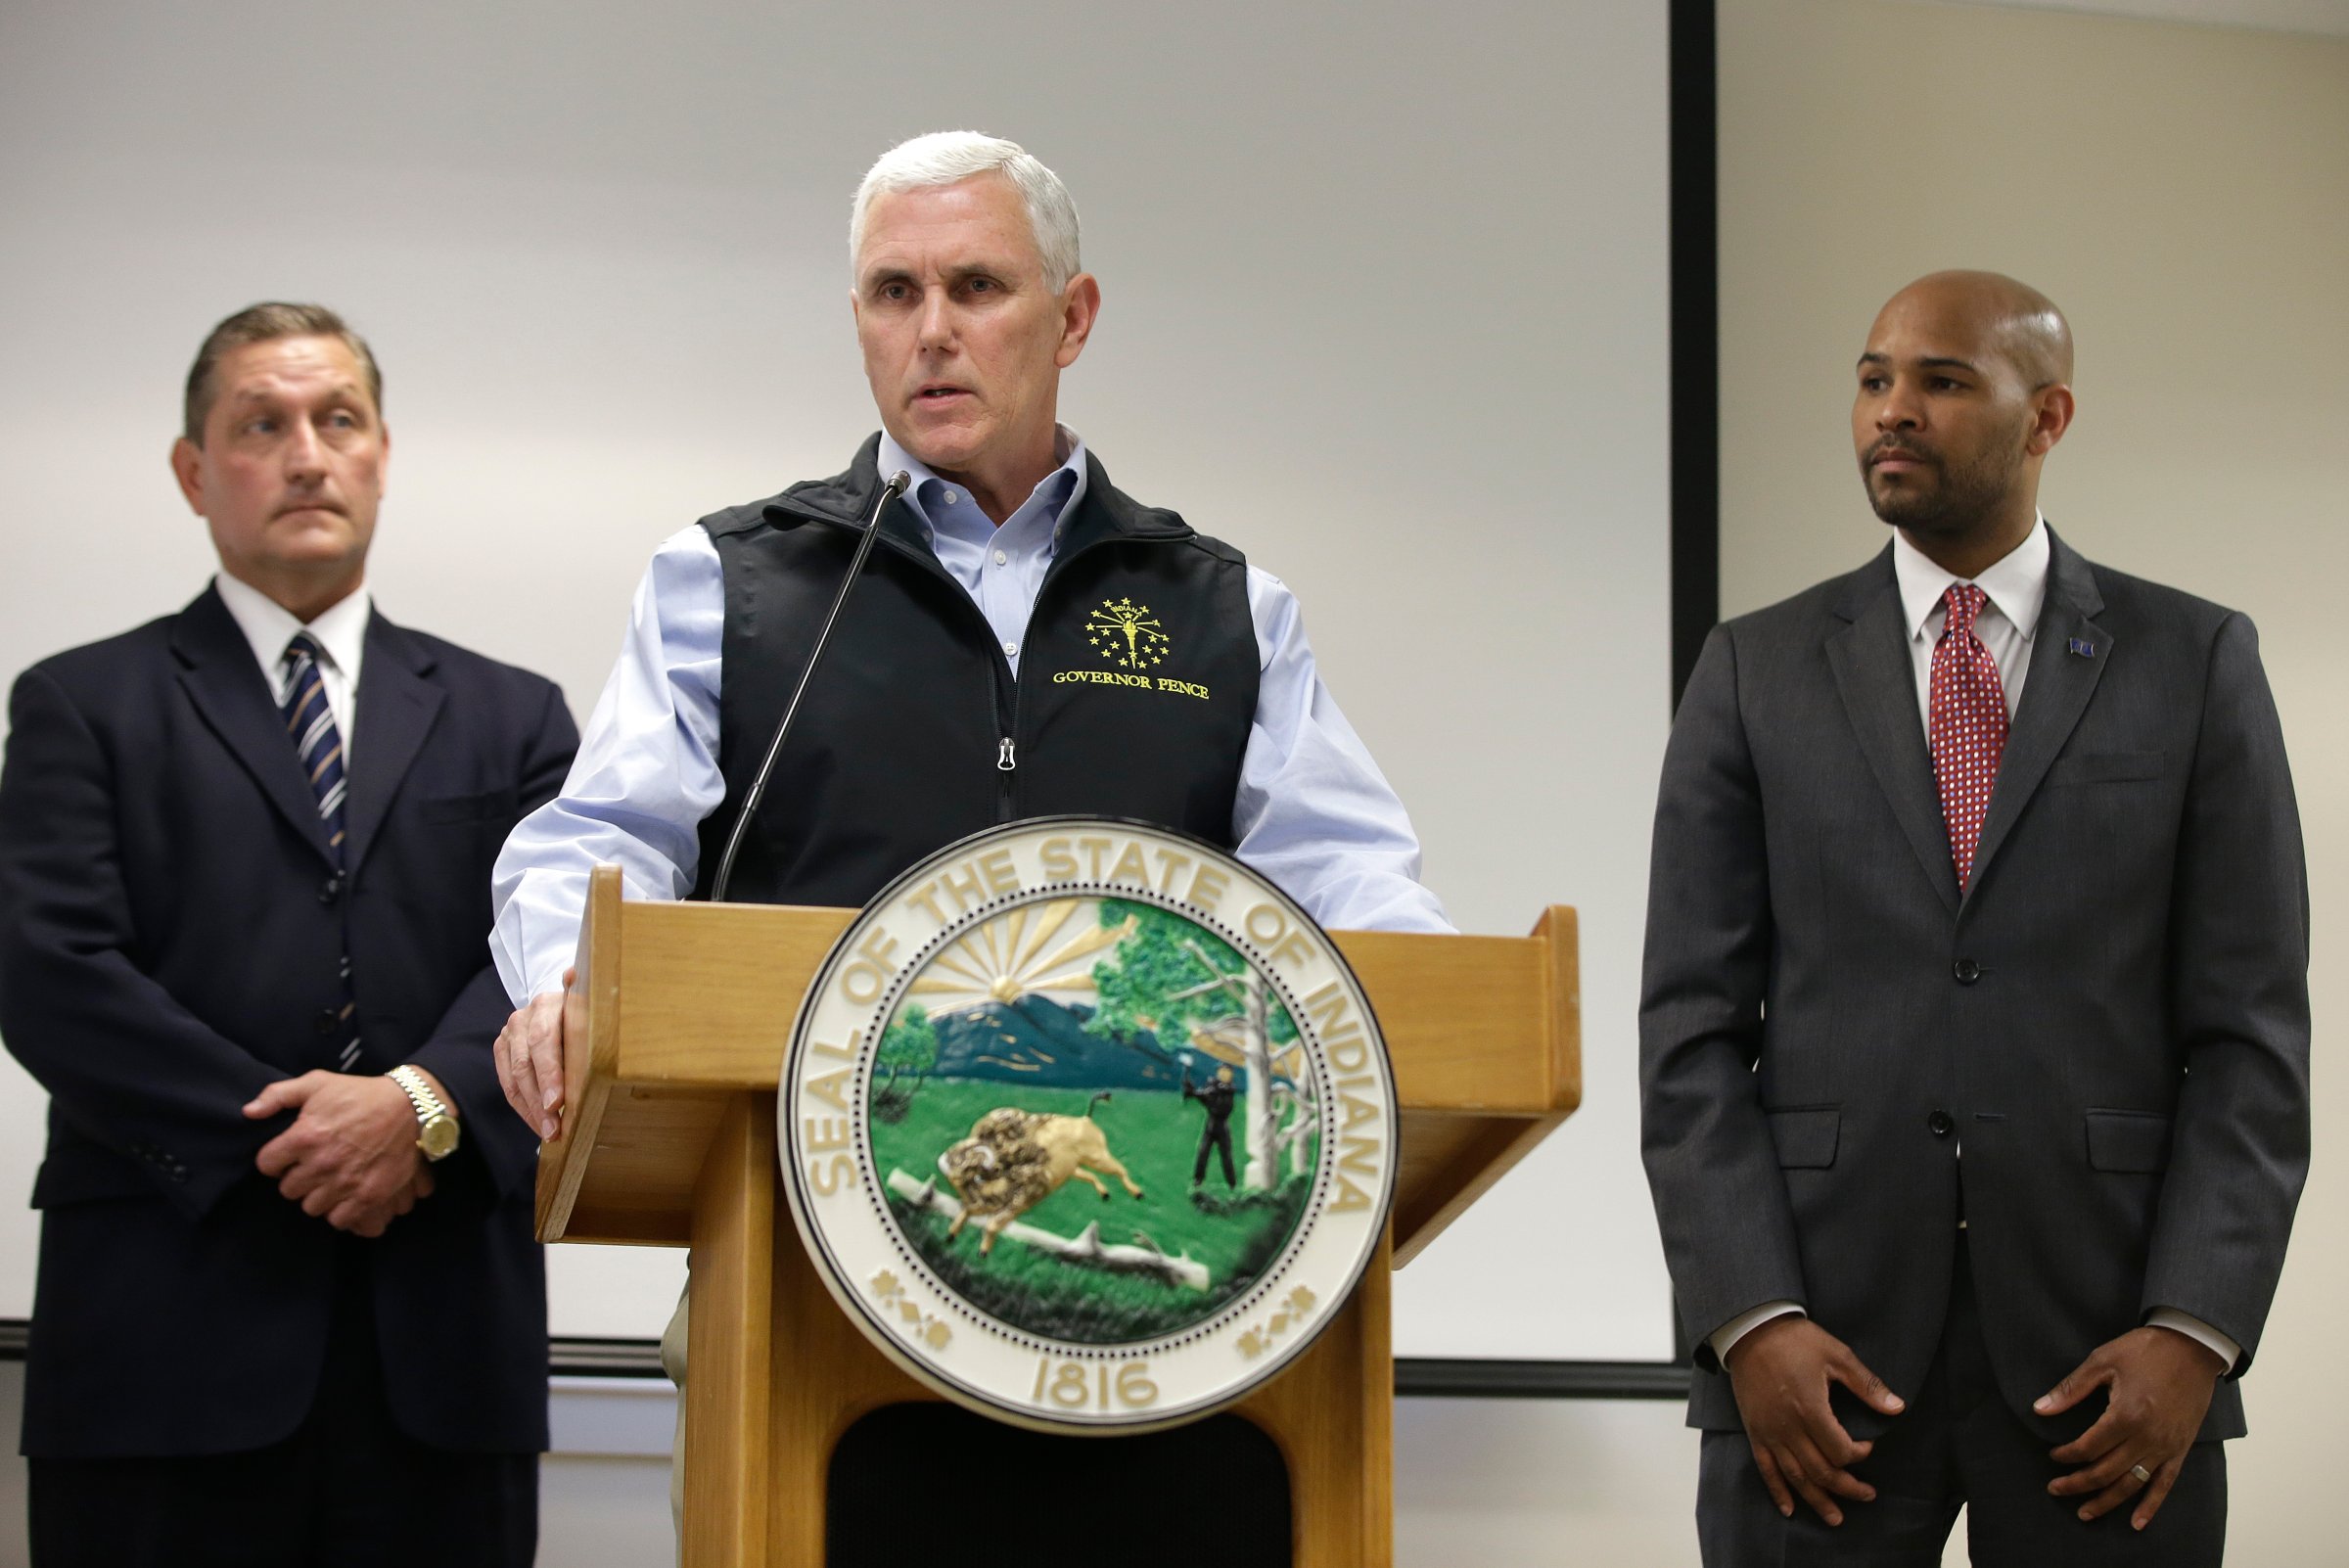 Indiana Gov. Mike Pence responds to a question during a news conference, March 25, 2015, in Scottsburg, Ind.